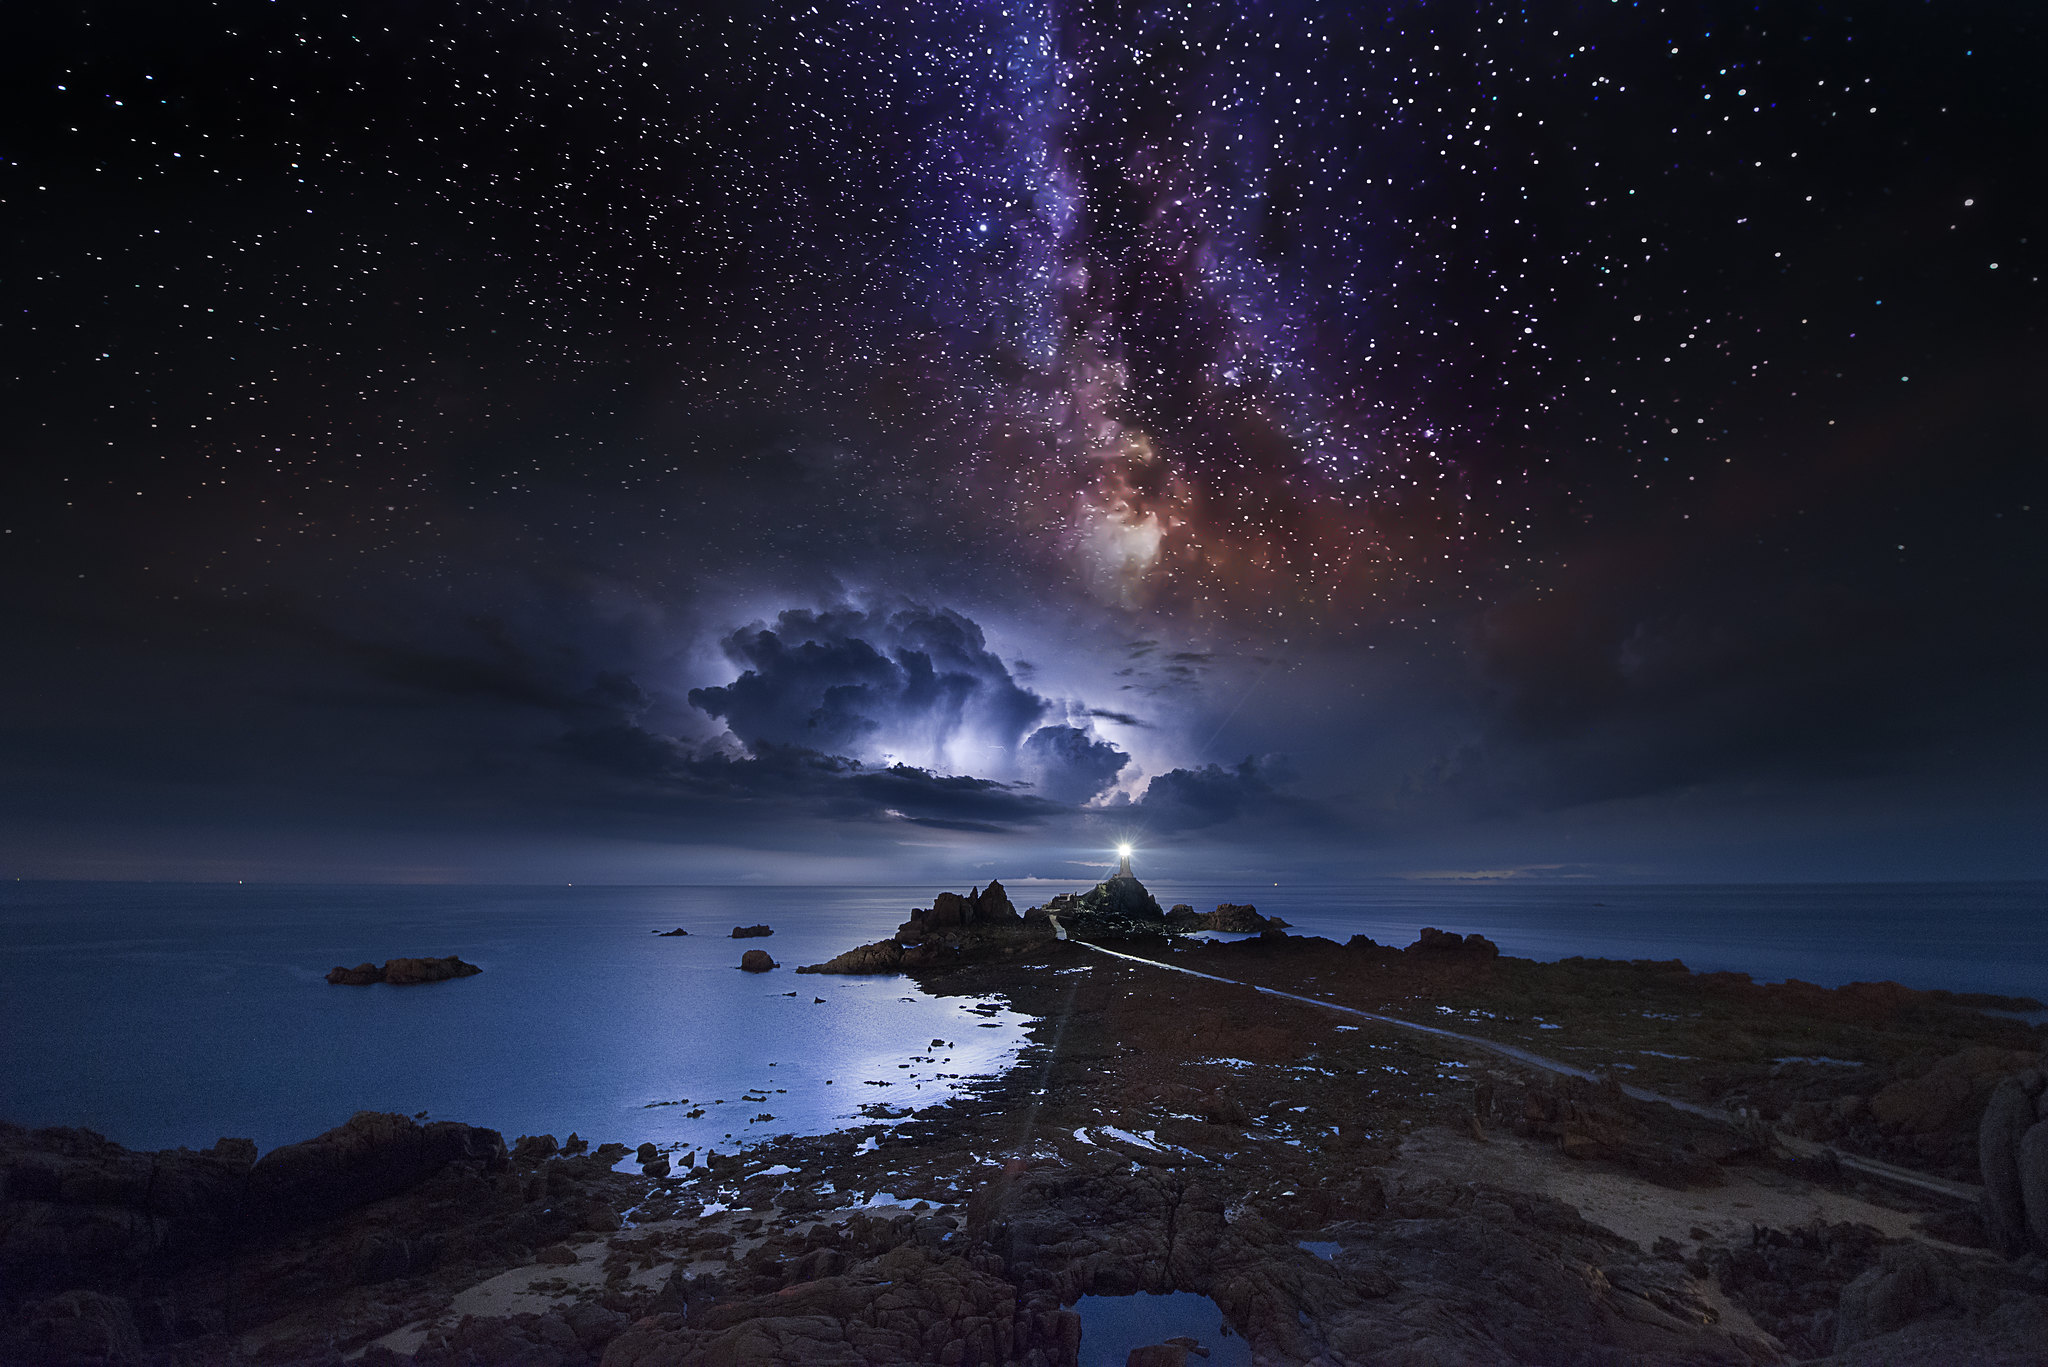 Wallpapers The Milky Way and the Storm night sea on the desktop